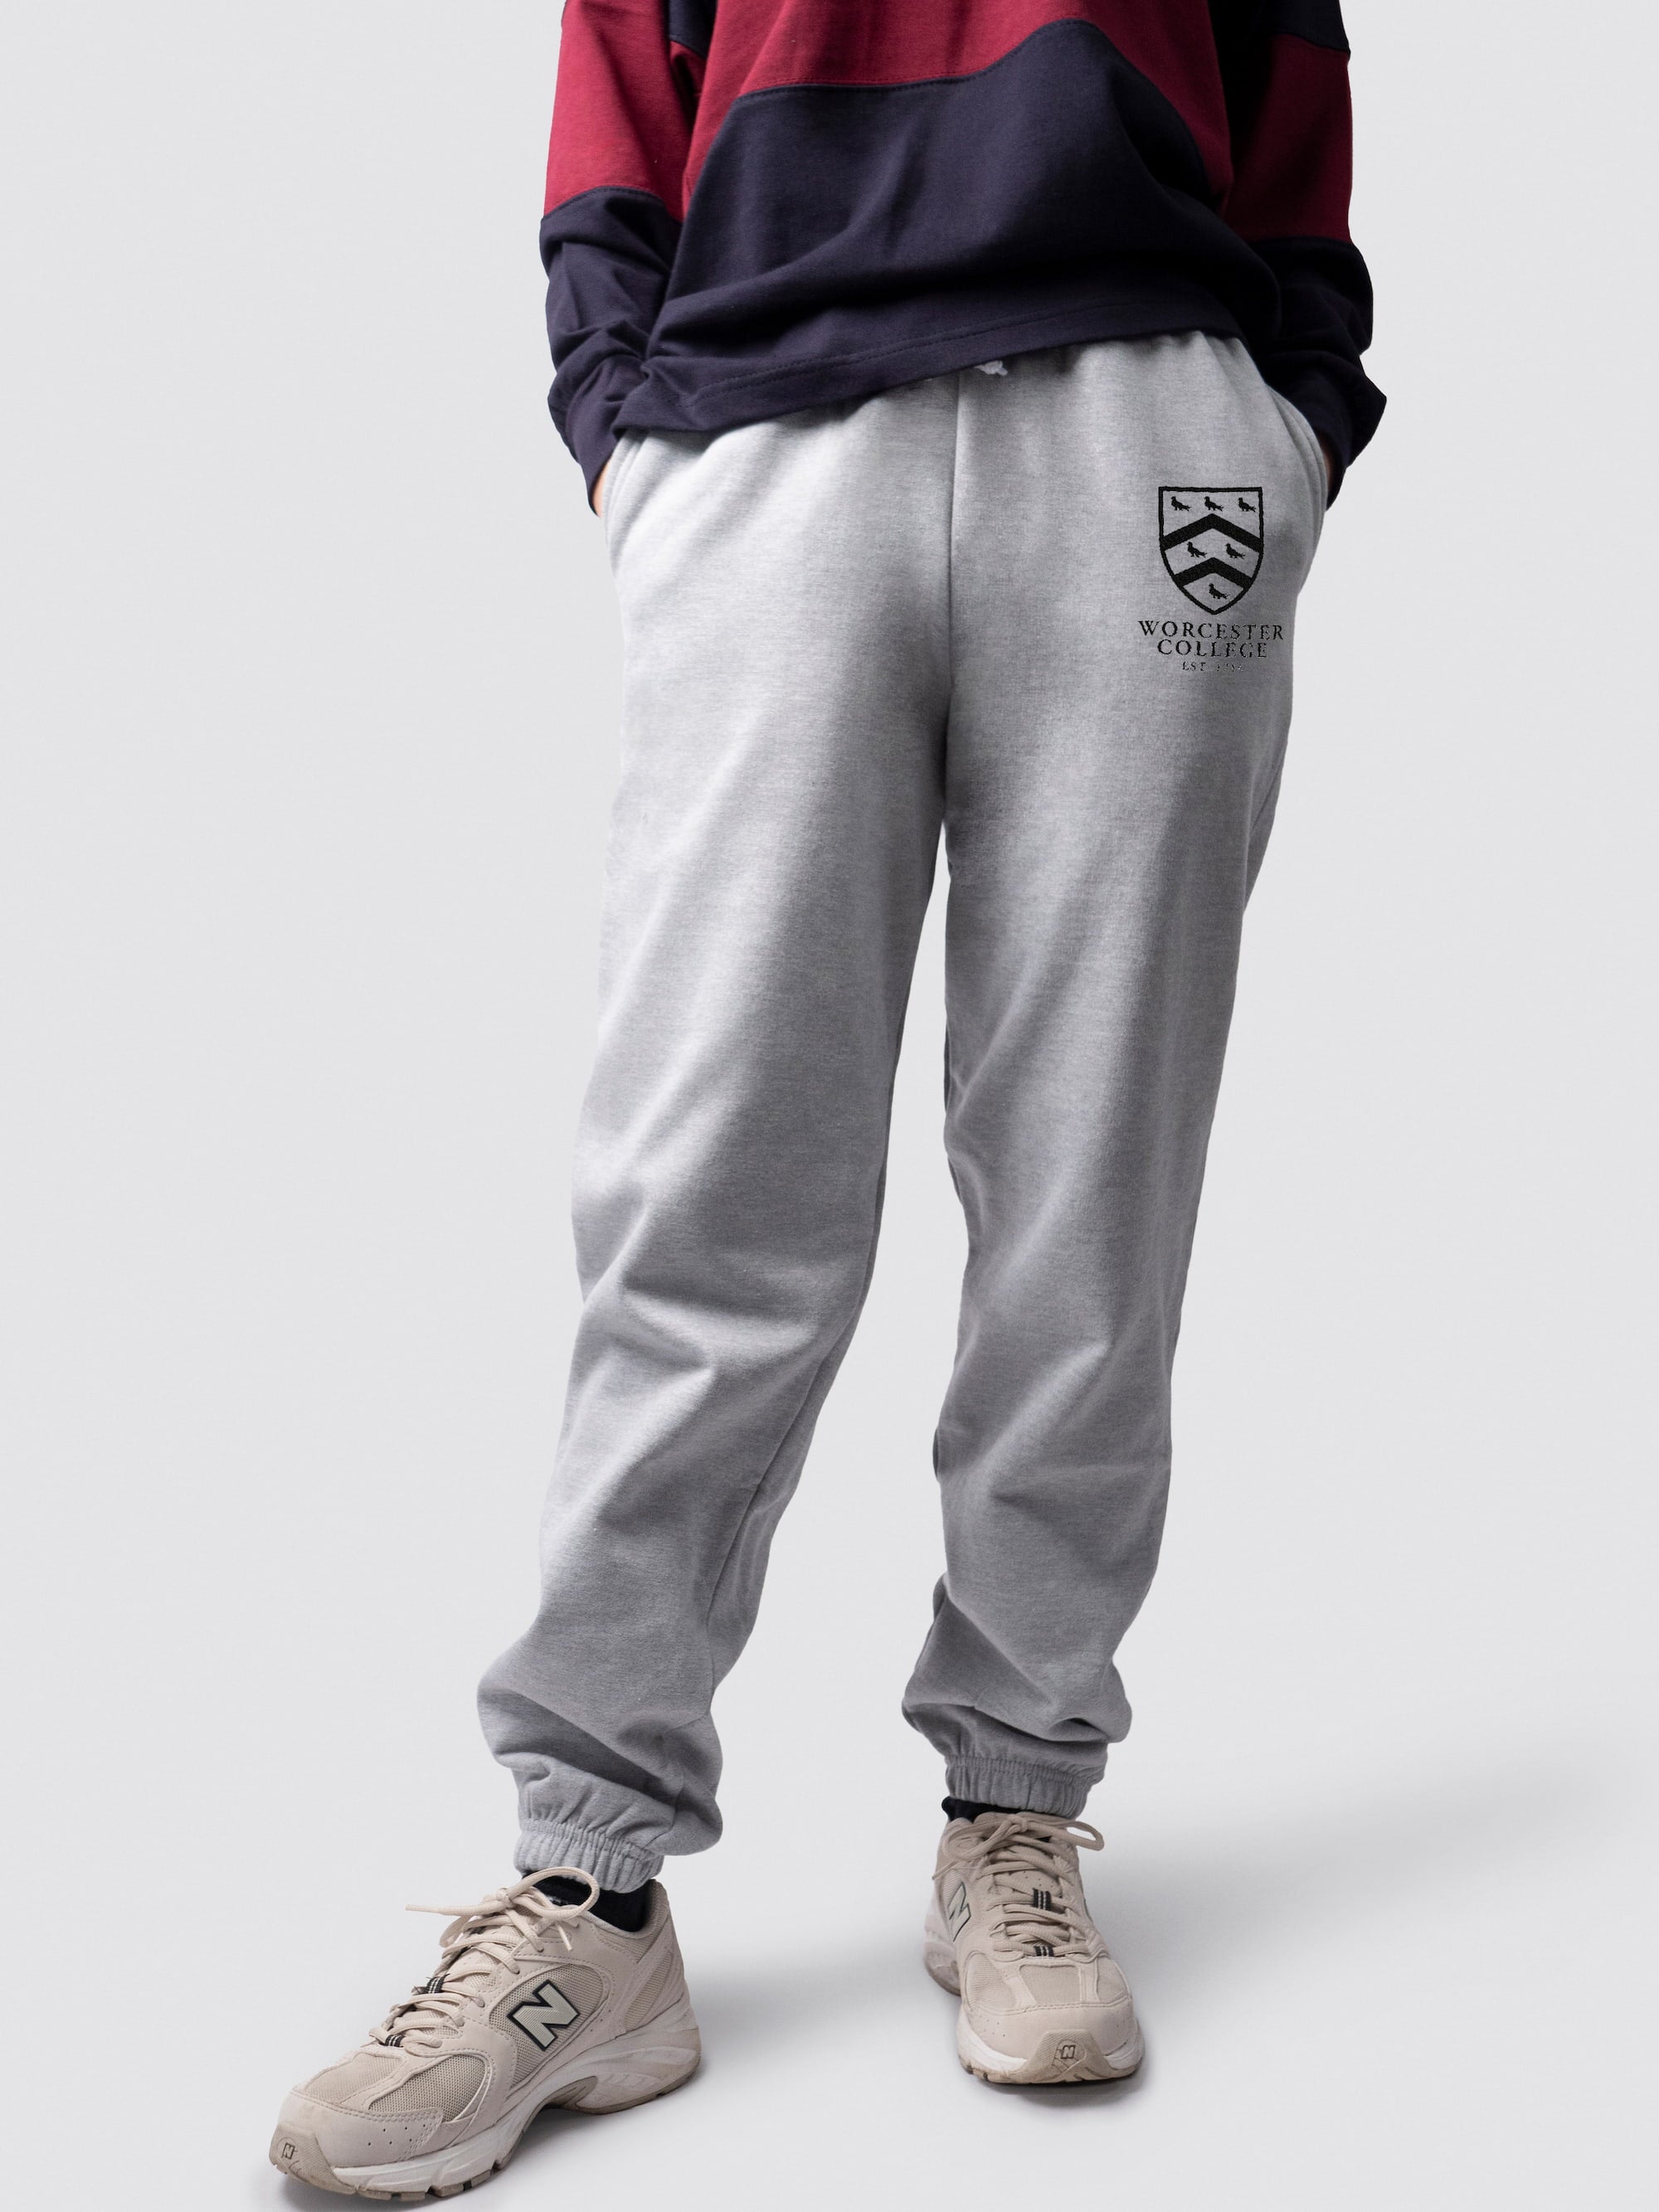 undergraduate cuffed sweatpants, made from soft cotton fabric, with Worcester logo